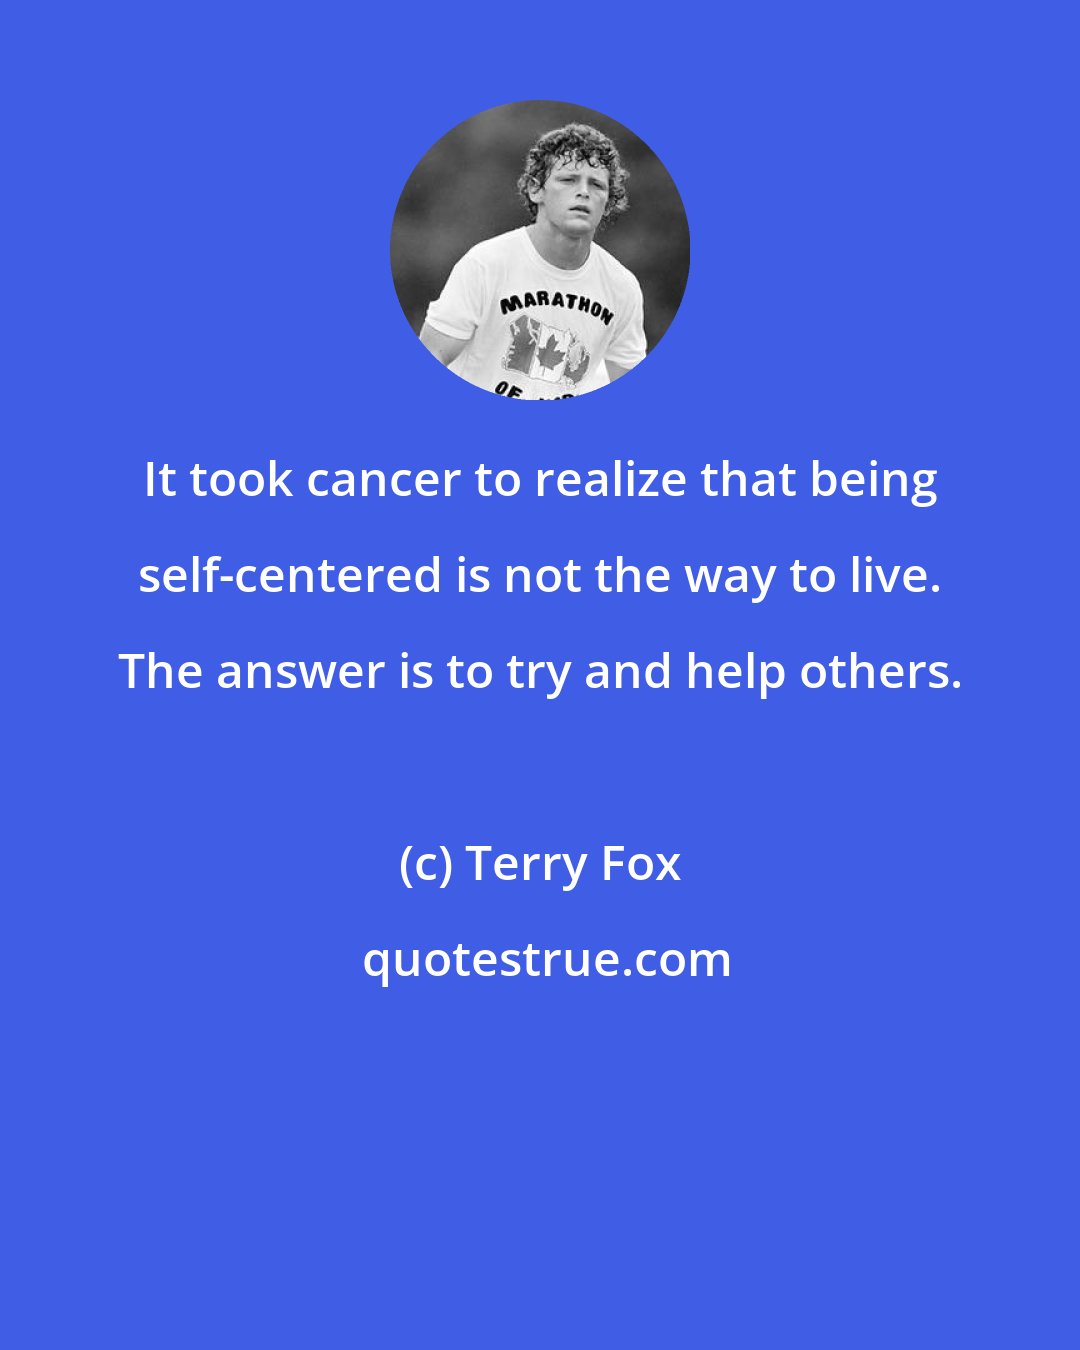 Terry Fox: It took cancer to realize that being self-centered is not the way to live. The answer is to try and help others.